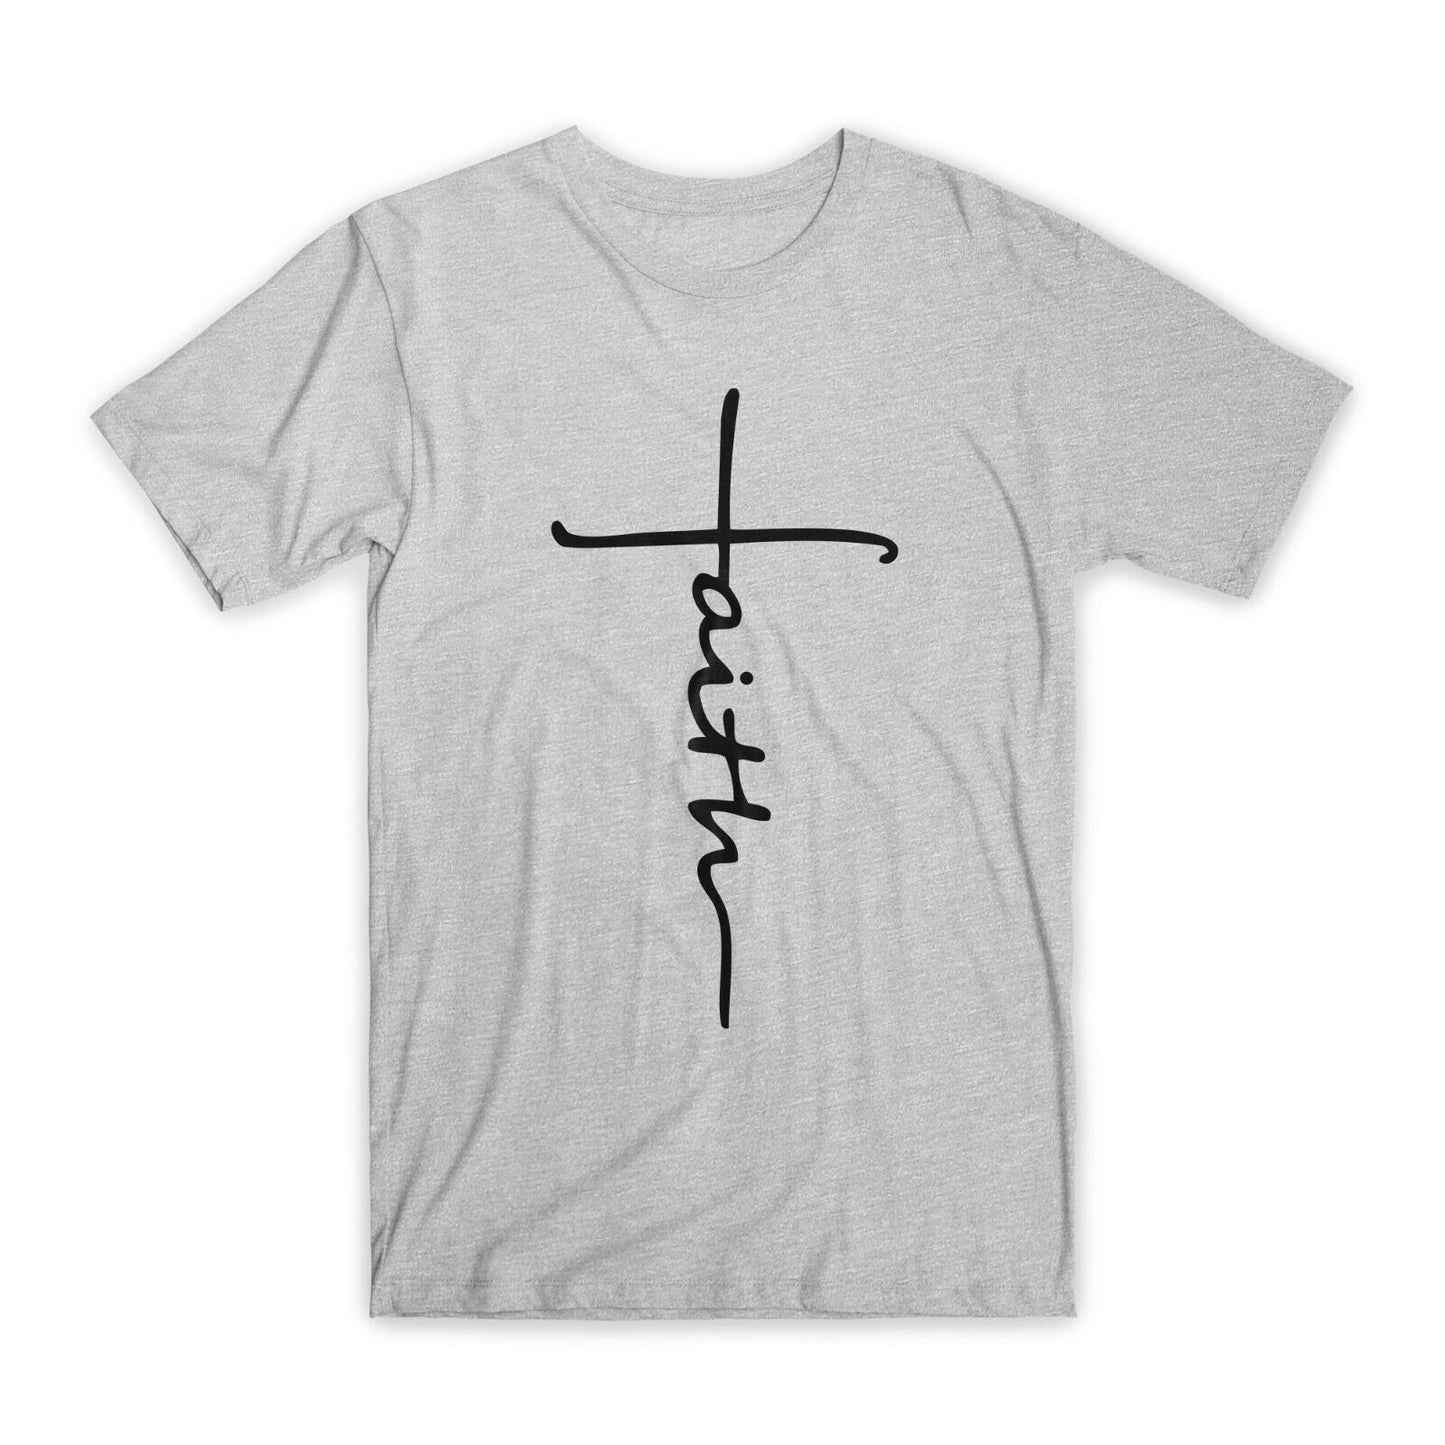 Faith Cross T-Shirt Premium Soft Cotton Crew Neck Funny Tees Novelty Gifts NEW